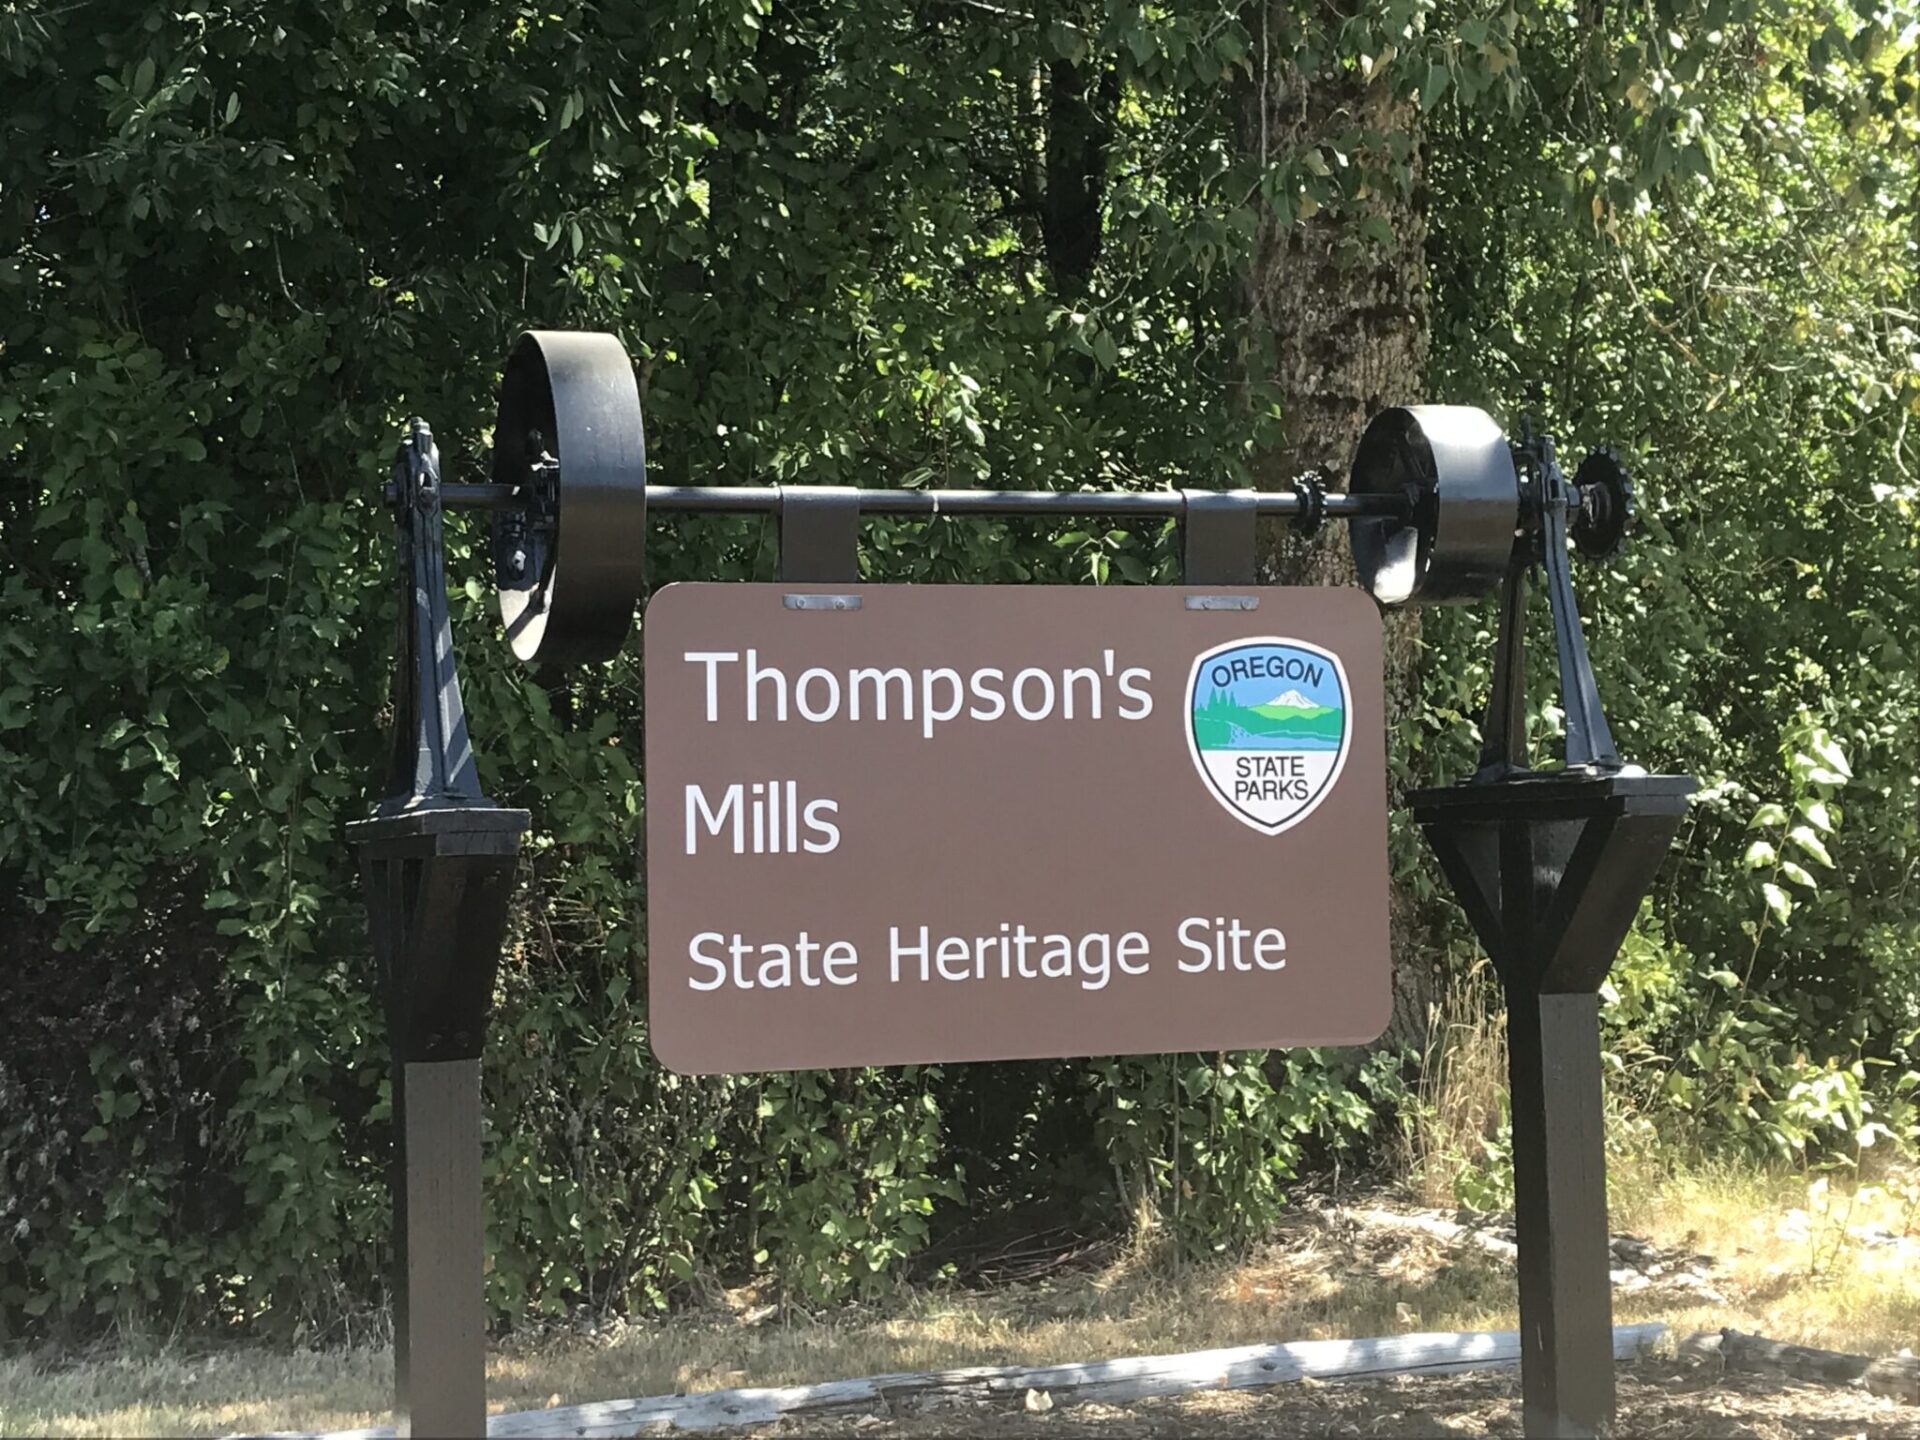 Entrance sign to Thompson's Mills State Heritage Site.  The sign is created from metalwork from the old mill works.